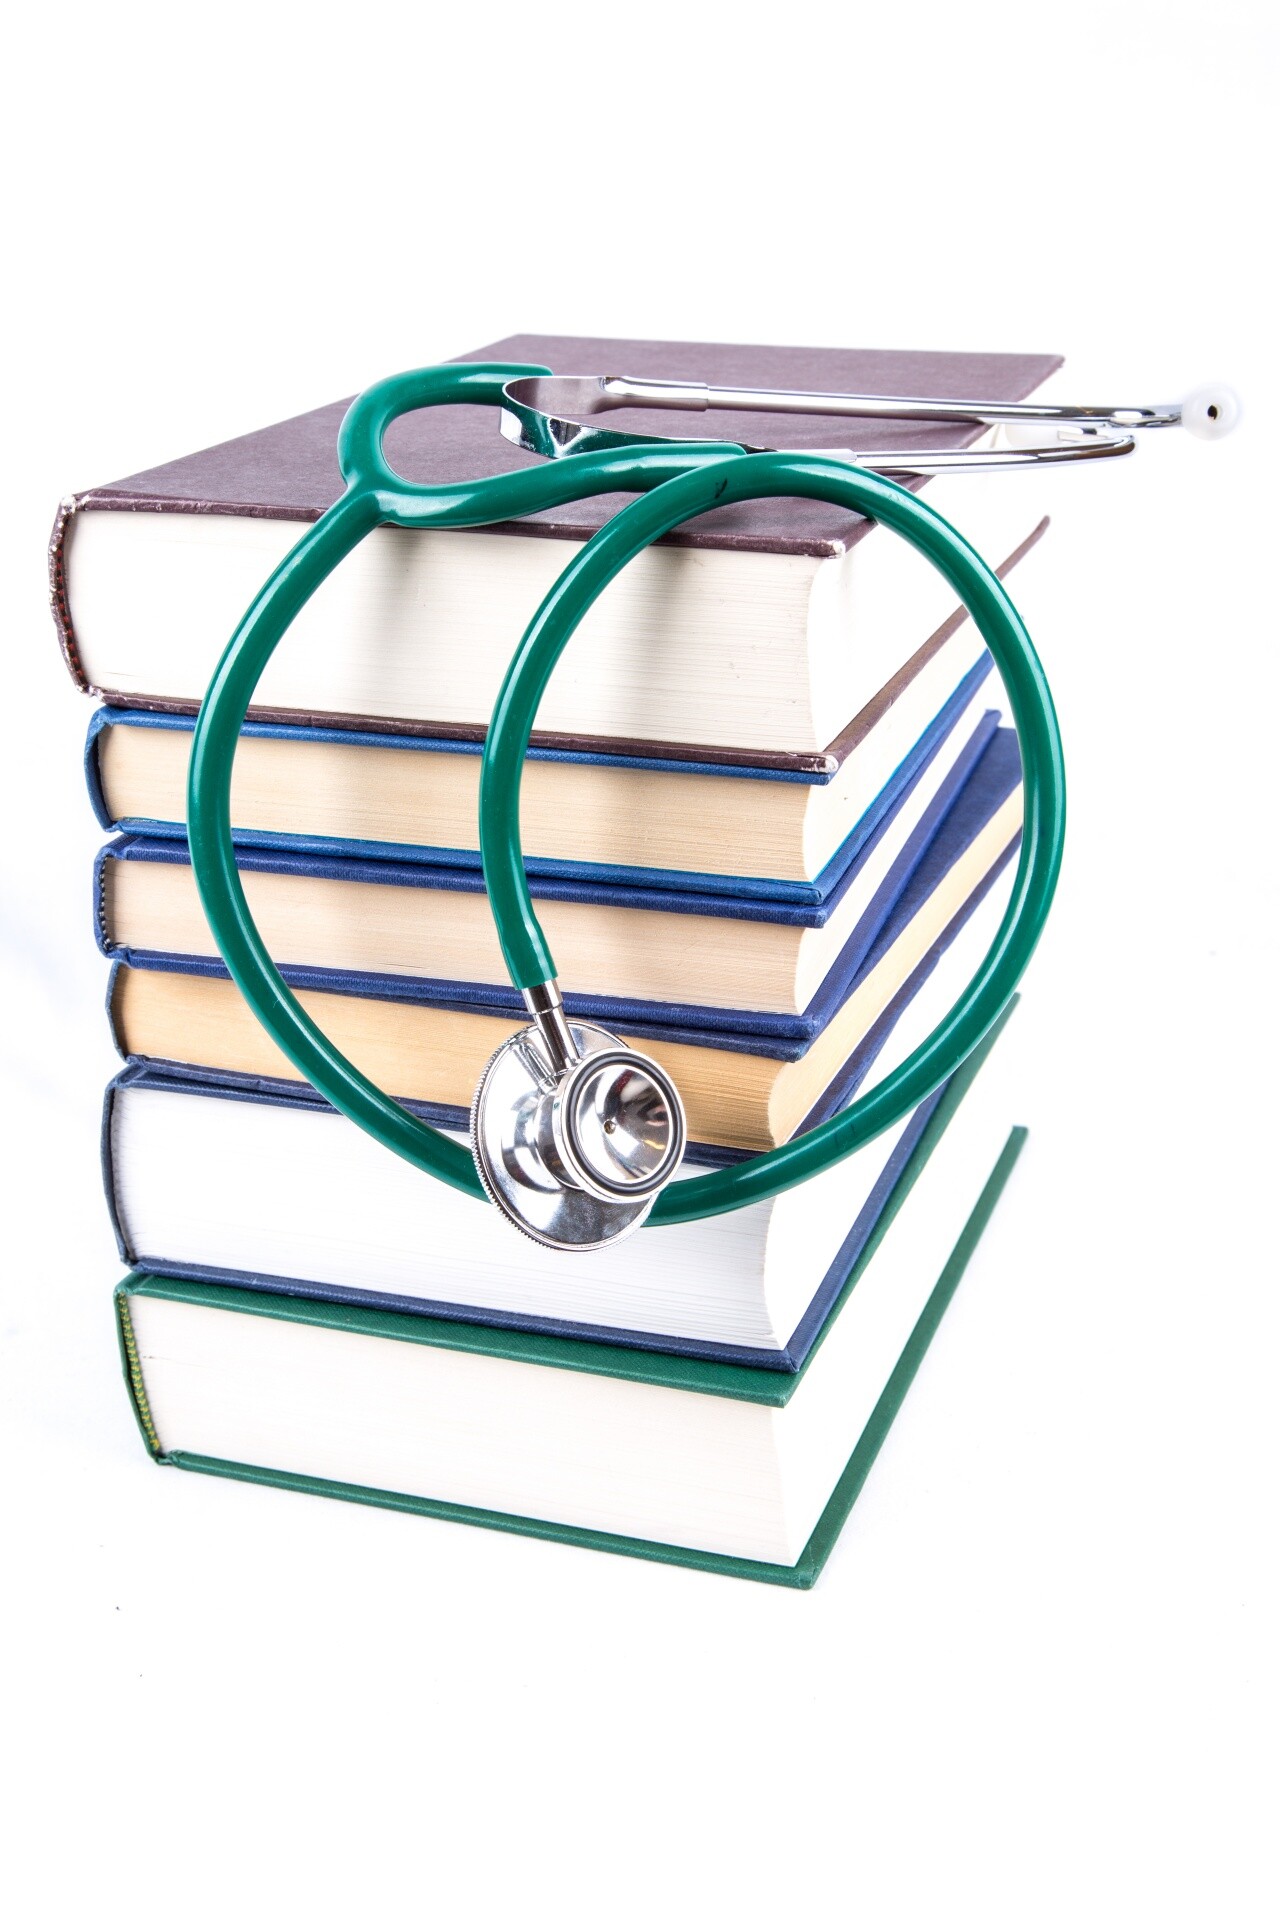 Books and stethoscope.